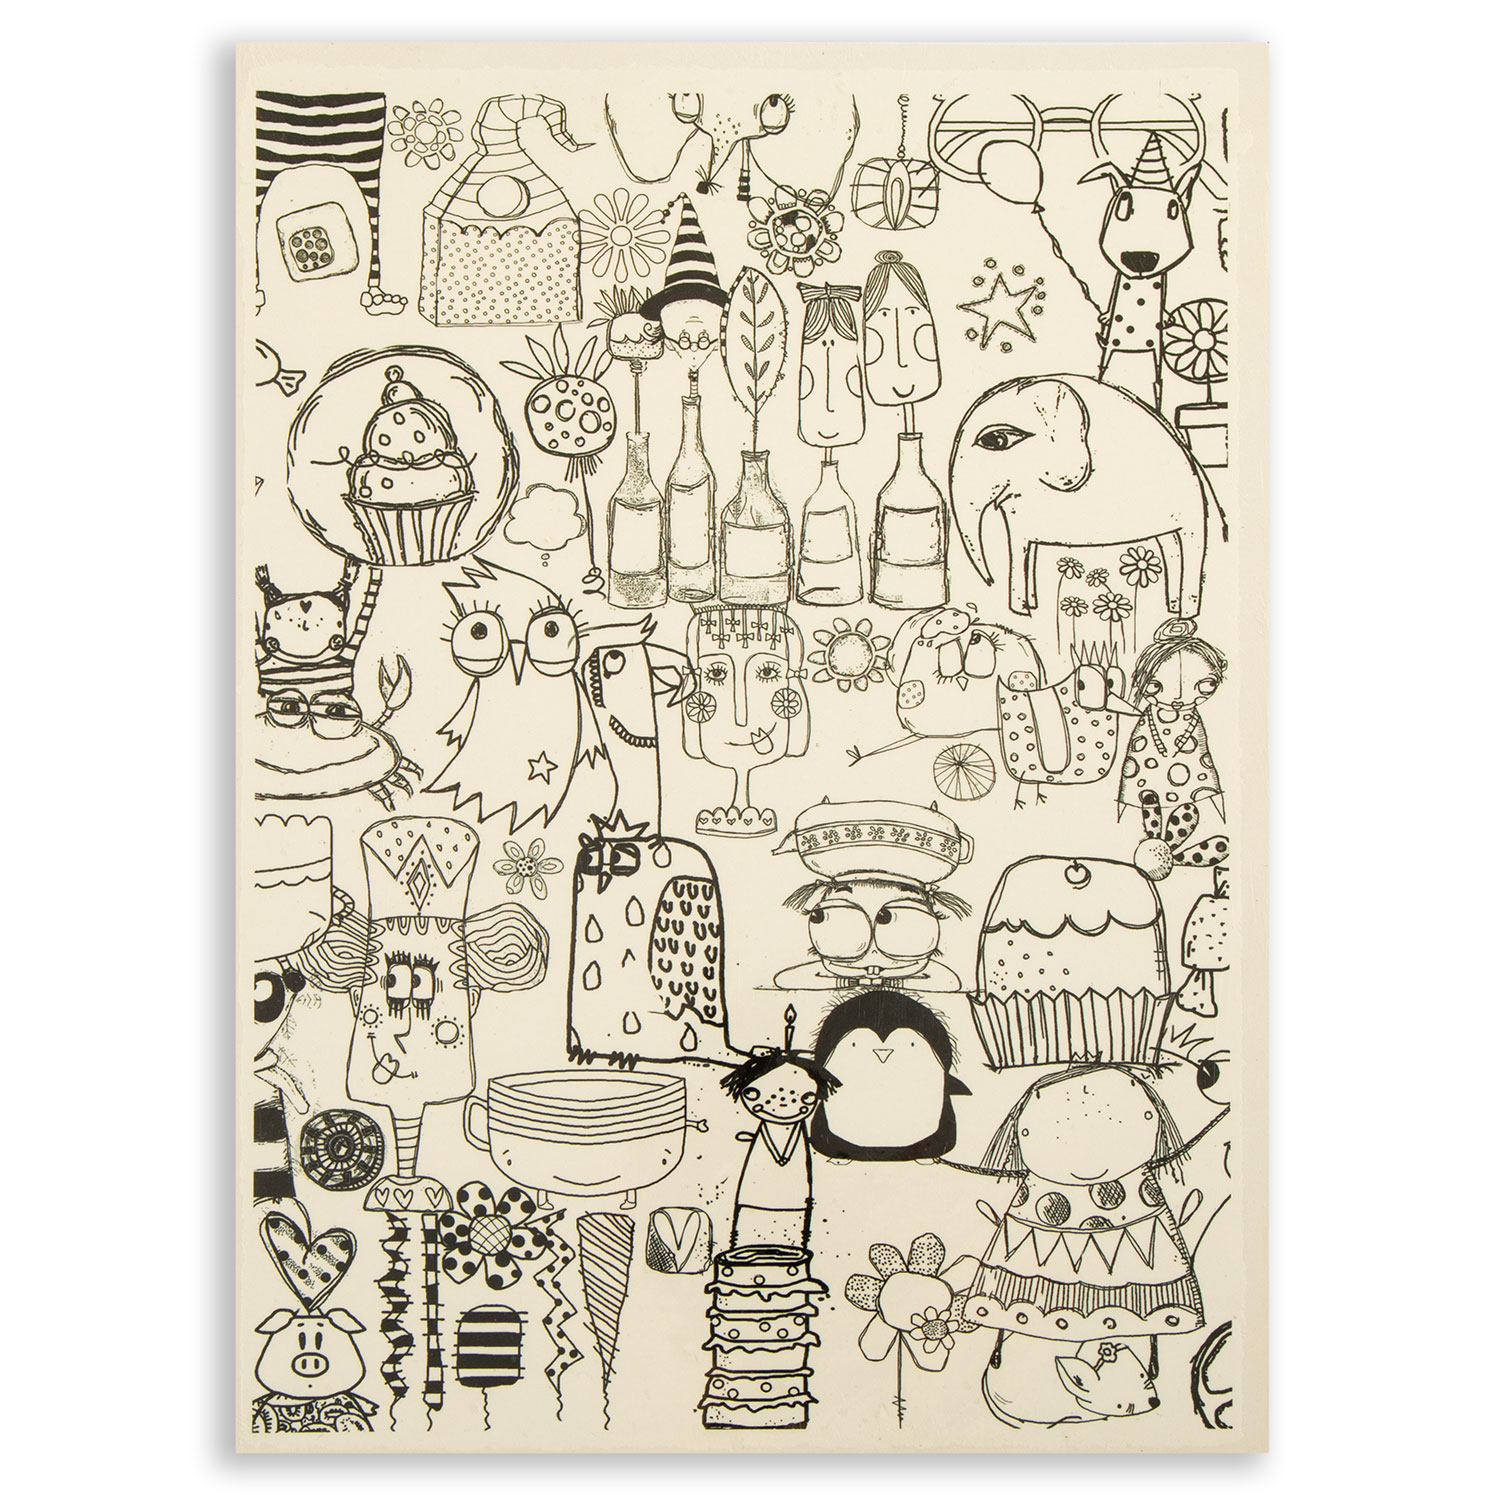 Dress My Craft A4 Transfer Me Pick N Mix - Choose any 8 - Doodled Background